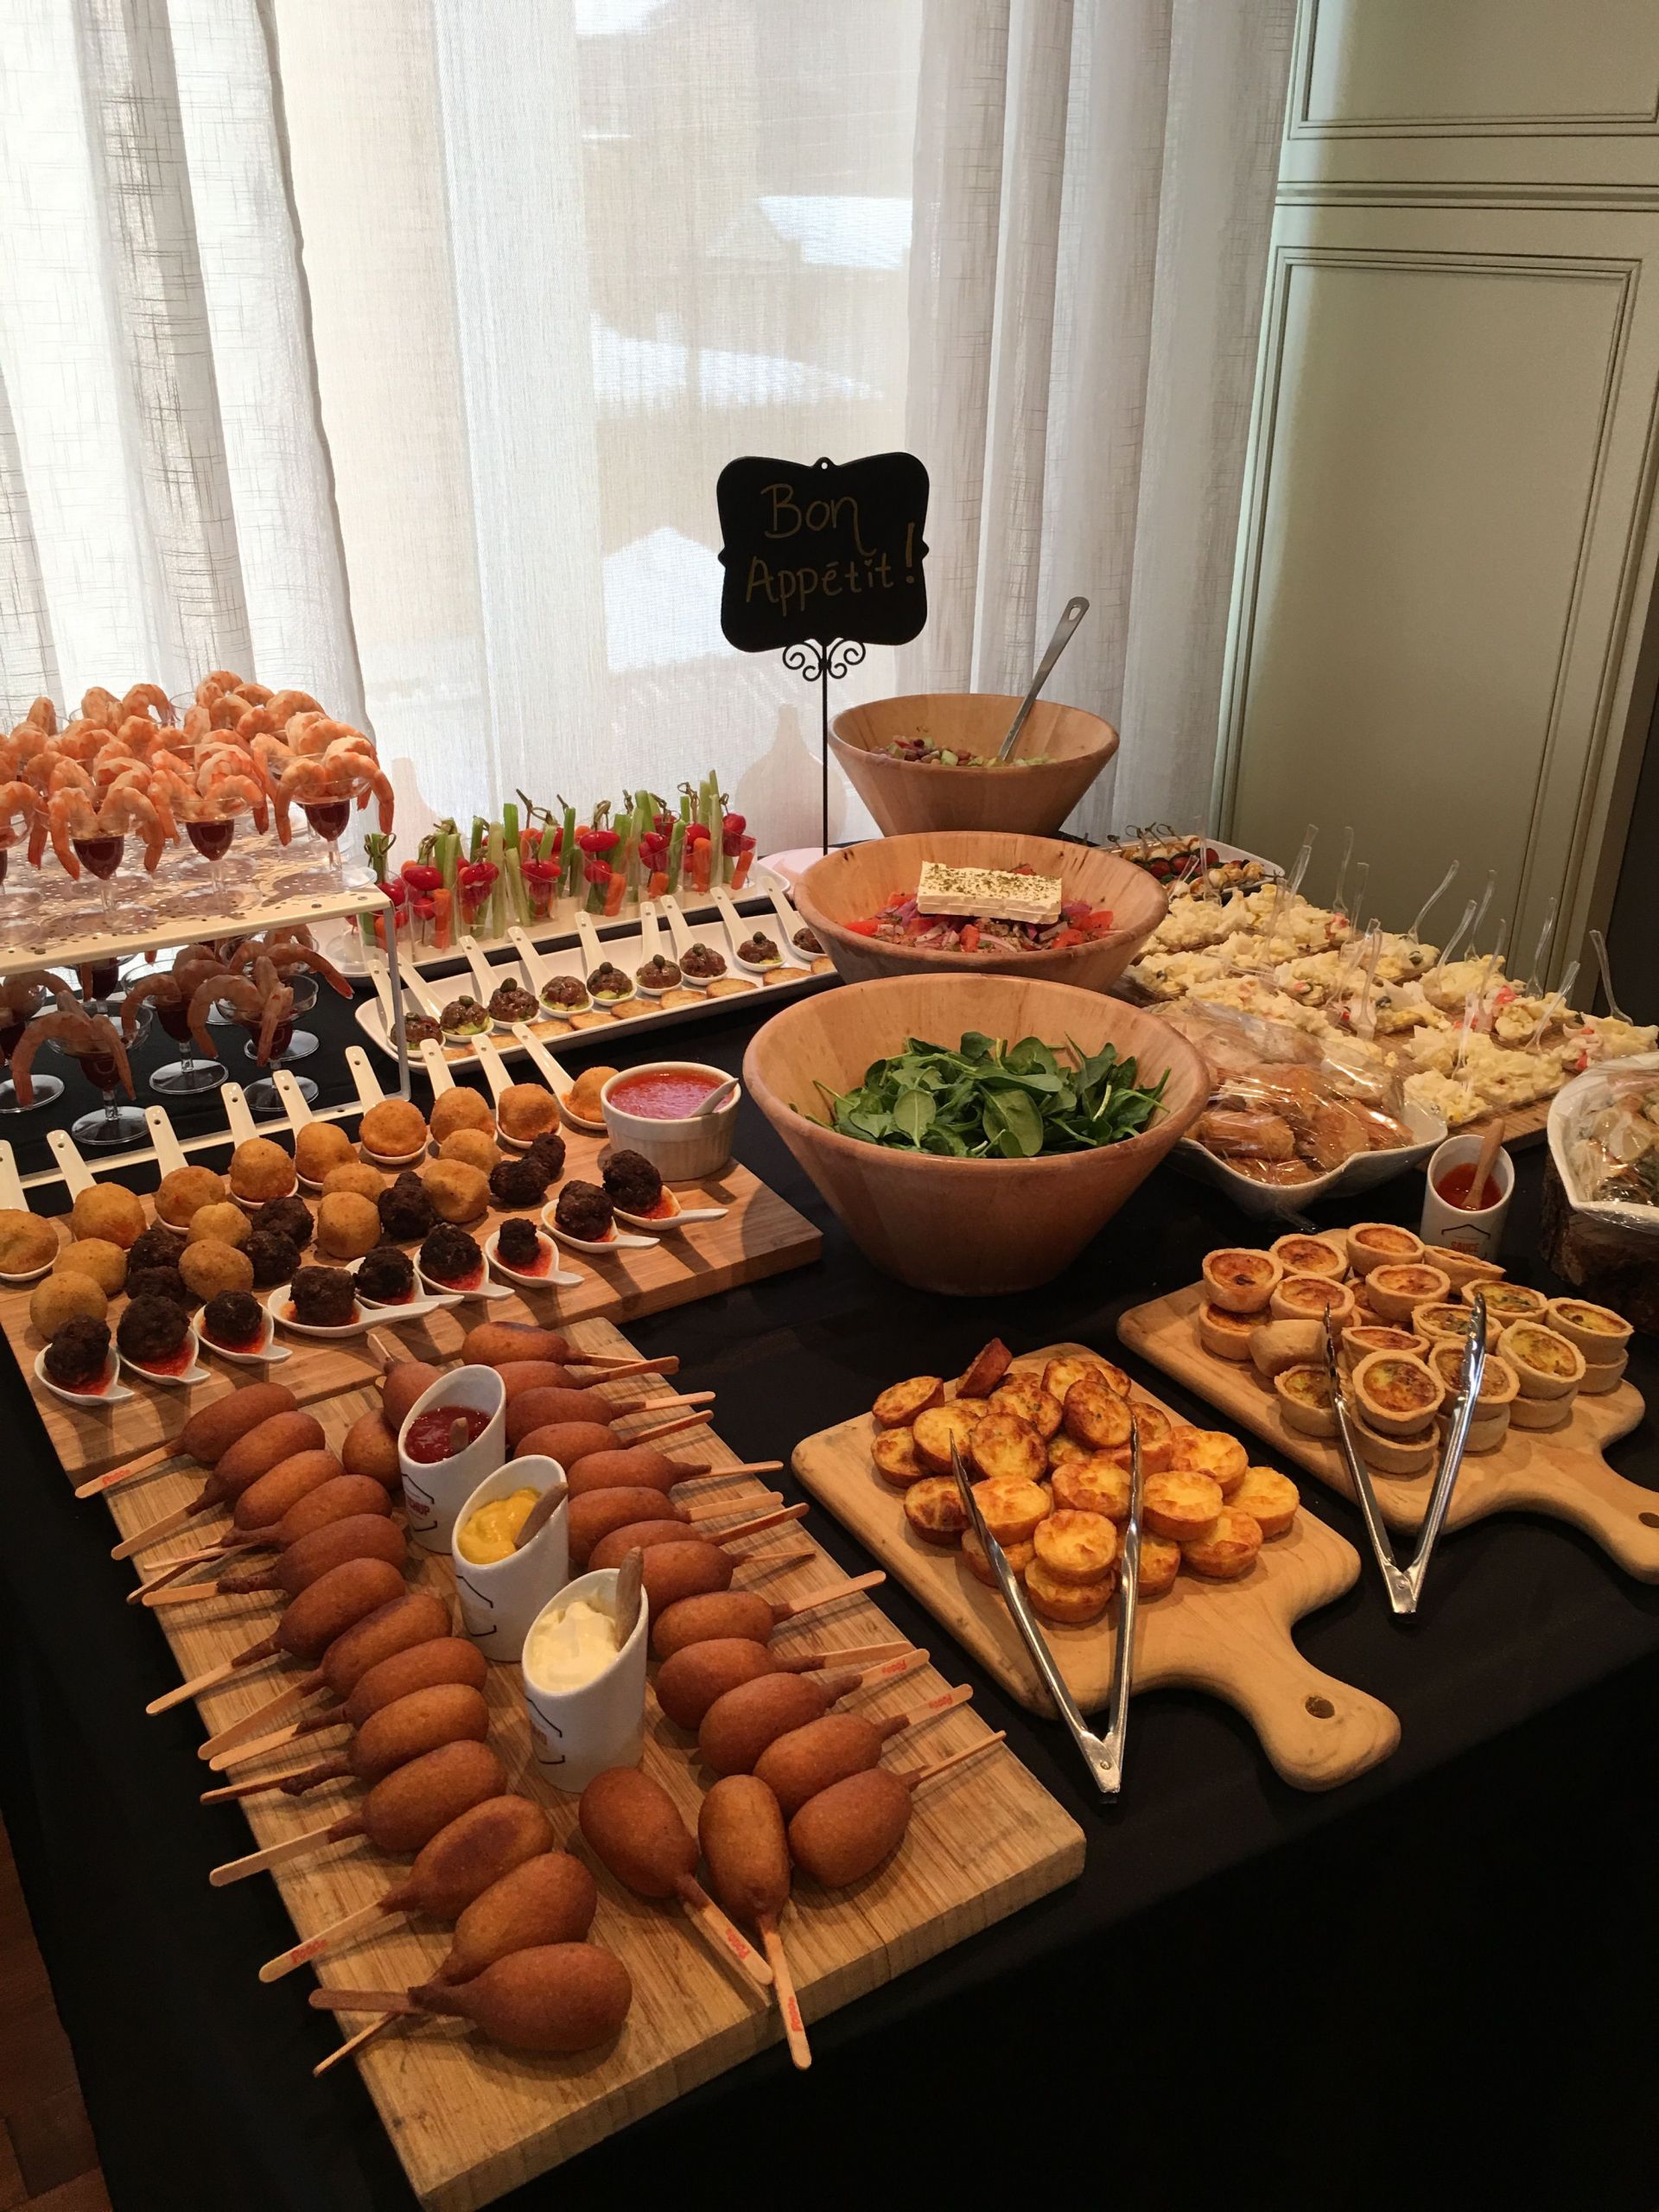 Brunch Food Ideas For A Party
 Brunch set up Baby shower in 2019